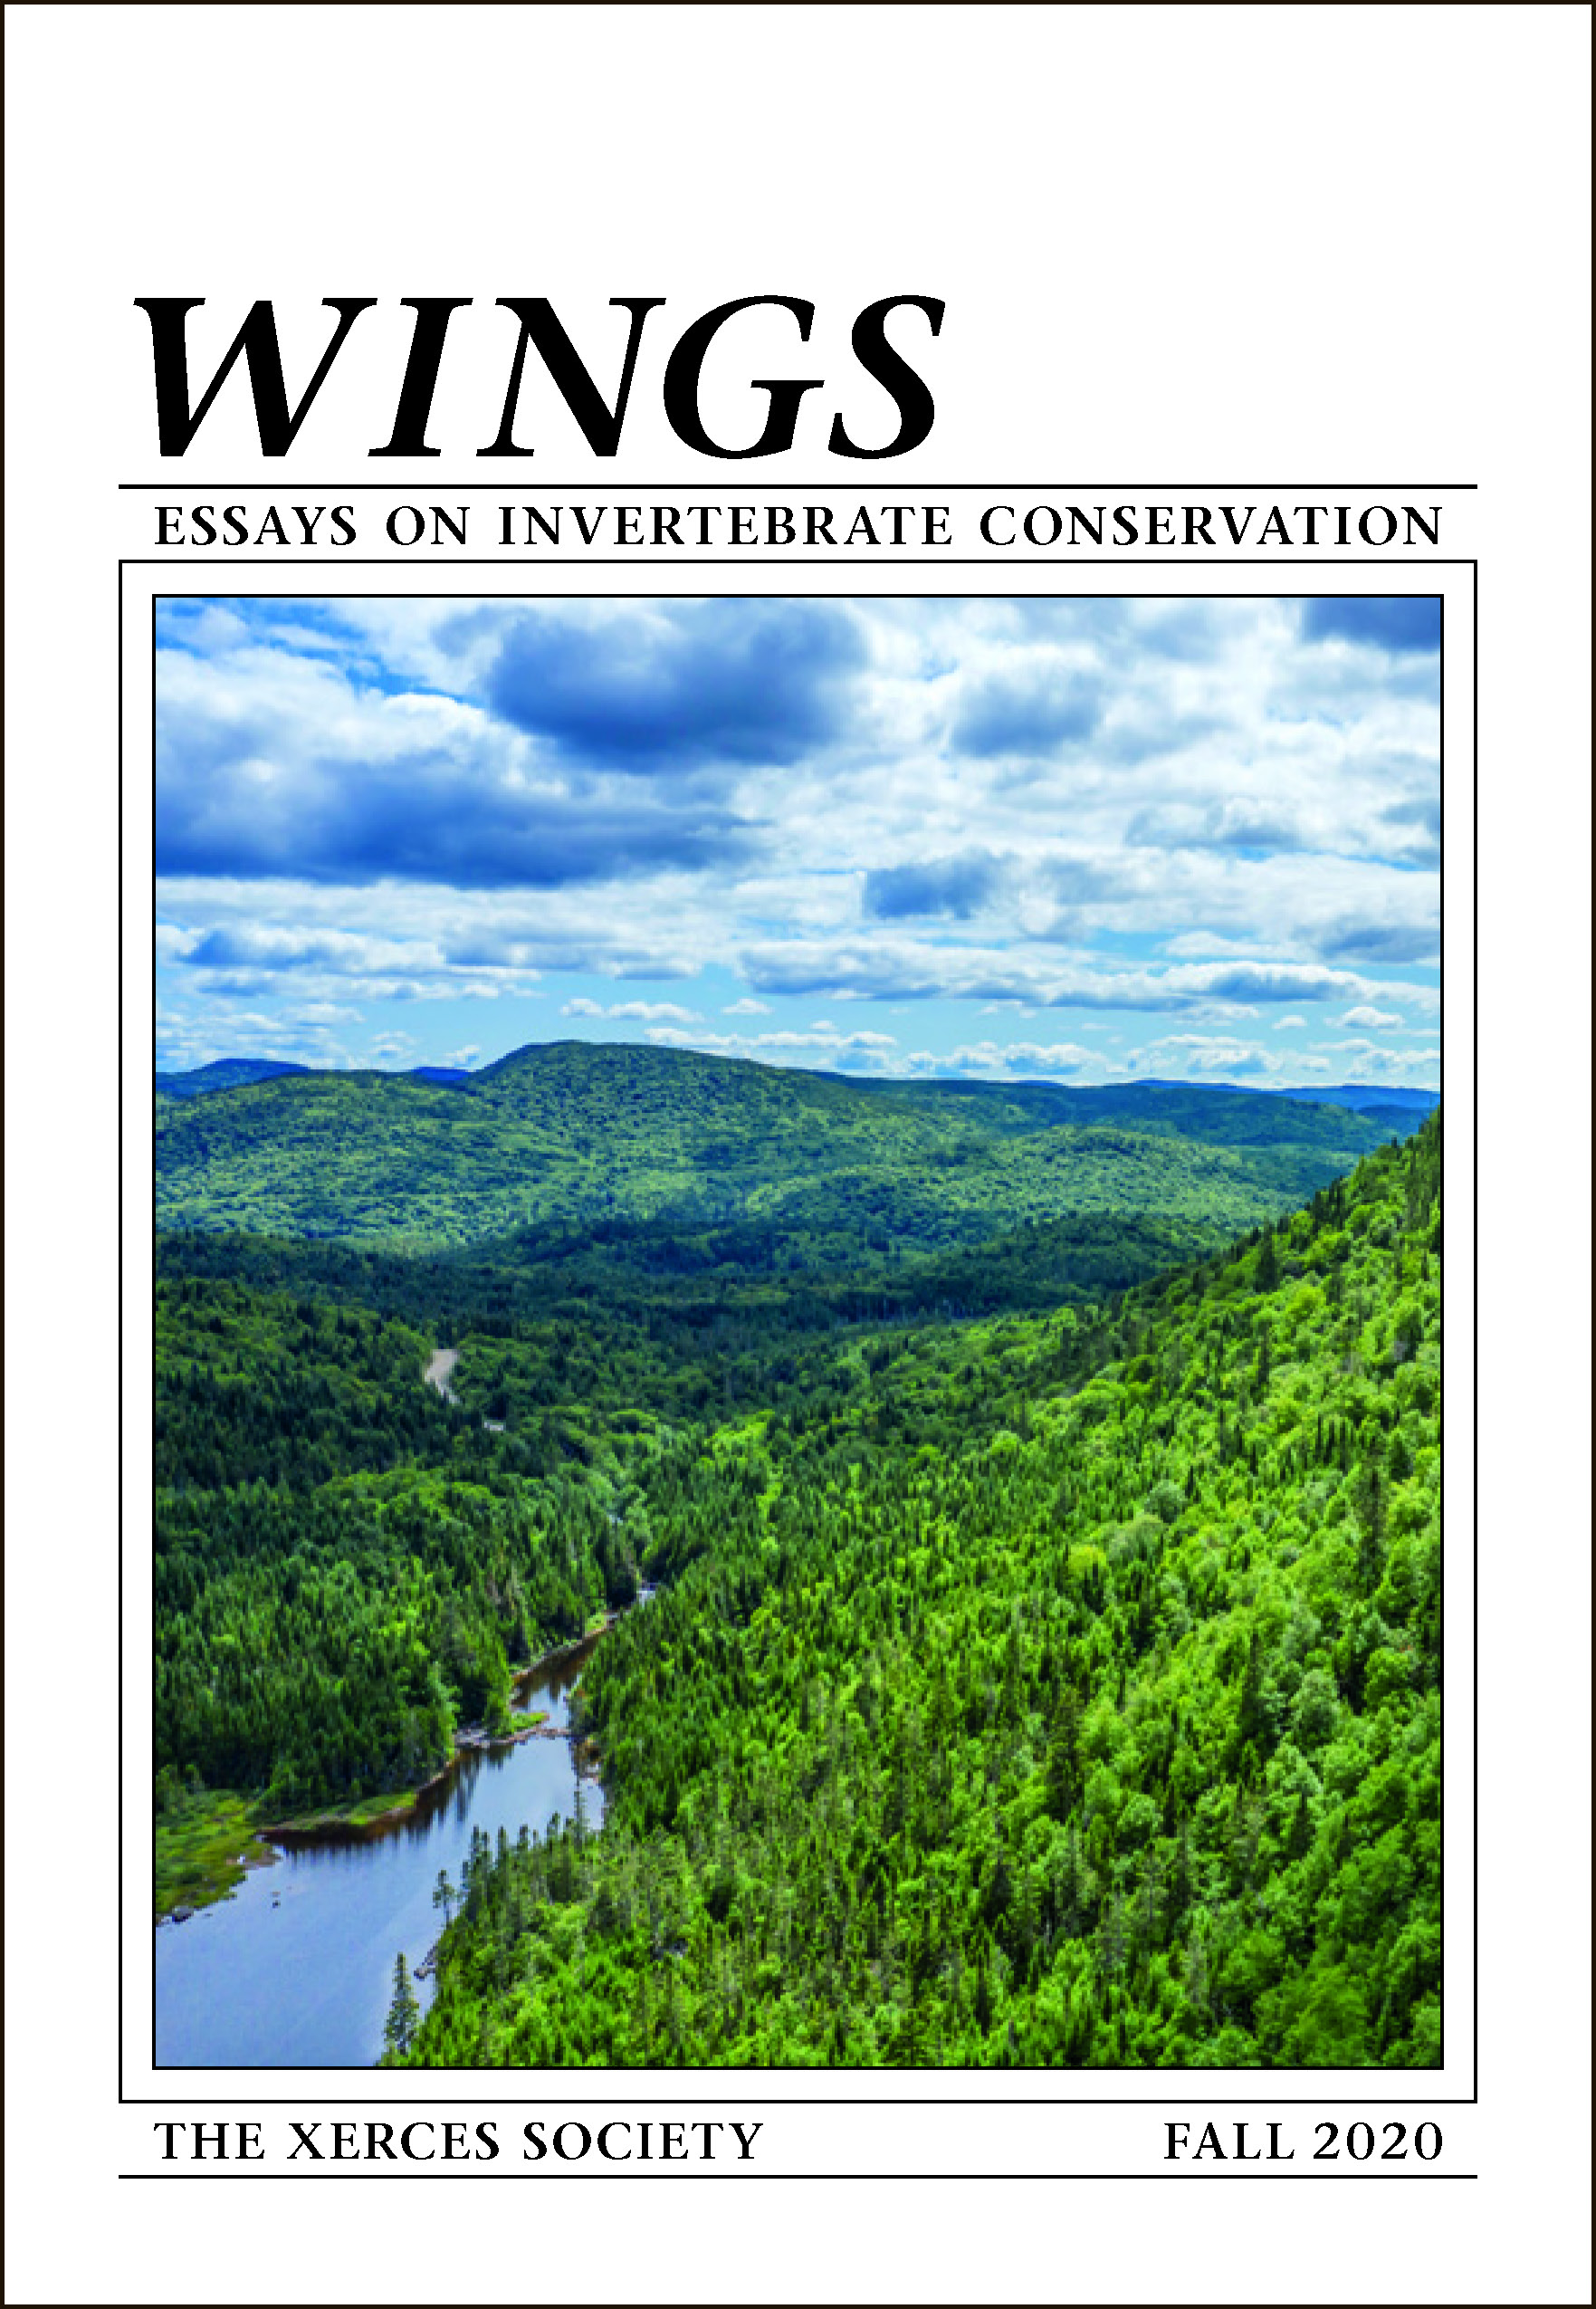 The cover of an edition of Wings is shown. In large text at the top is 